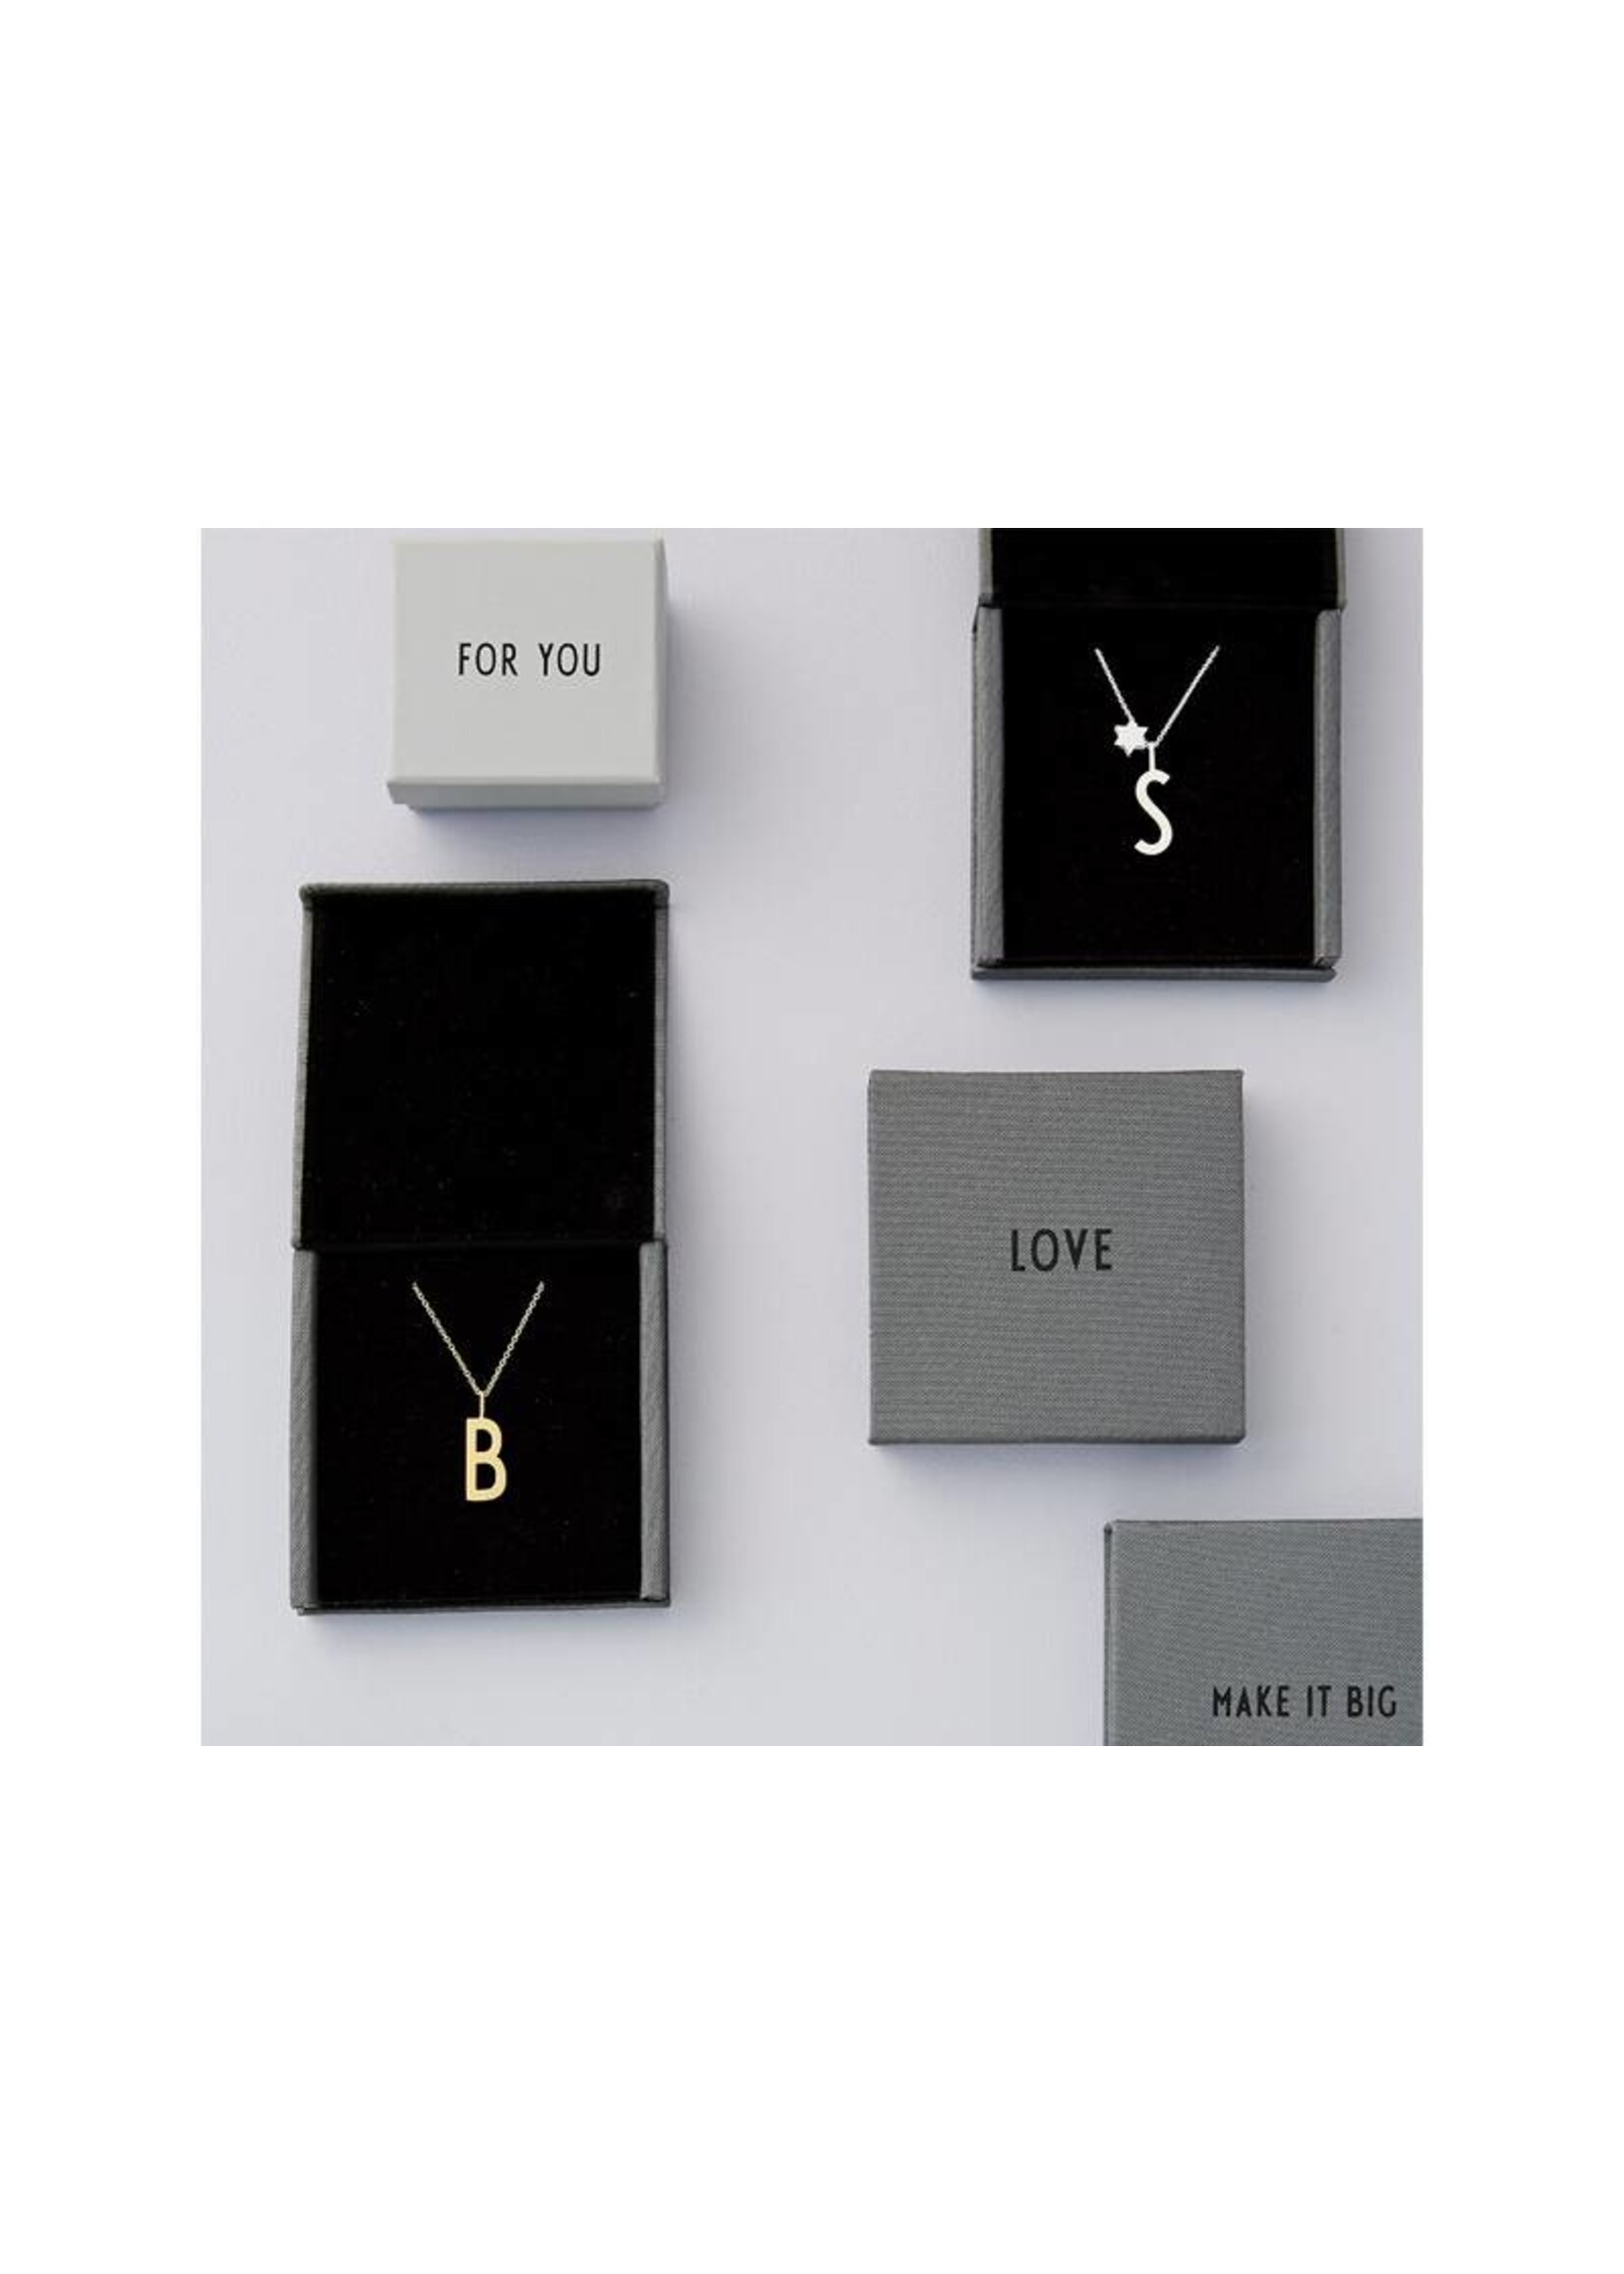 Design Letters Chain Necklace - Gold Plated Silver